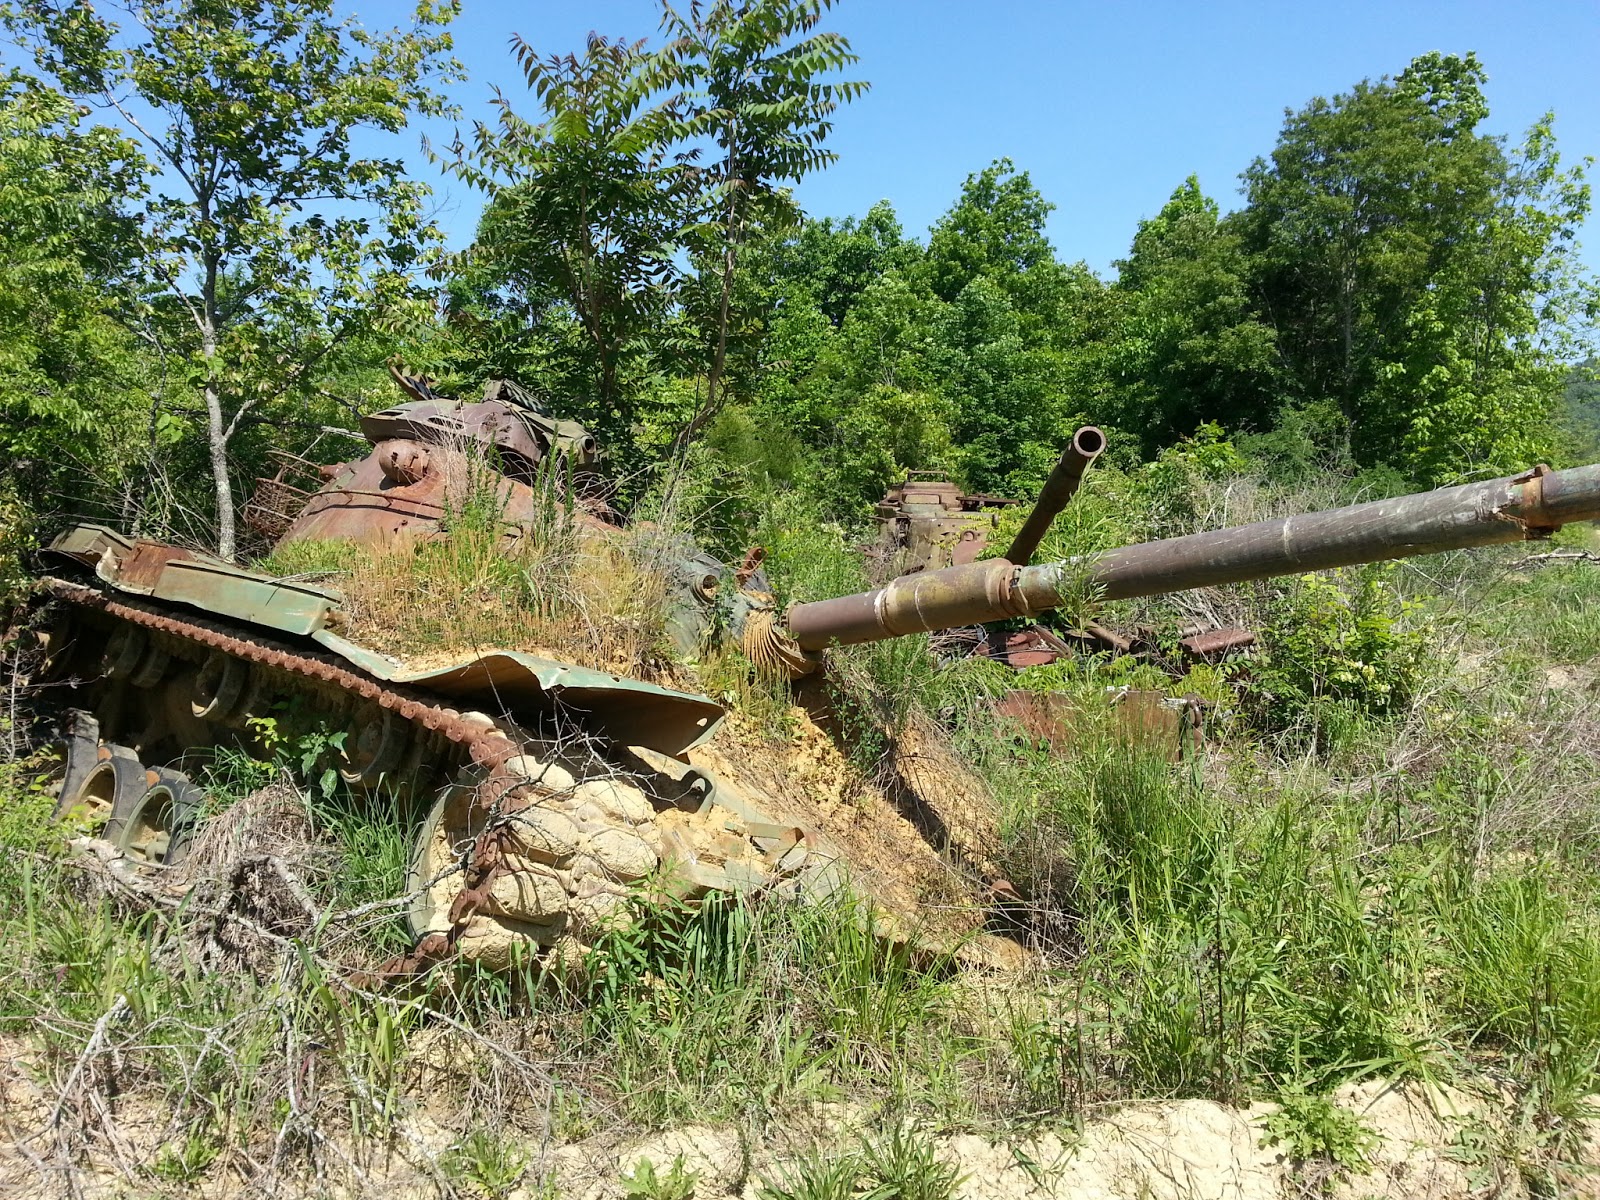 Eerie Indiana: Fort Knox Tank Graveyard - Fort Knox Military Base, Ky